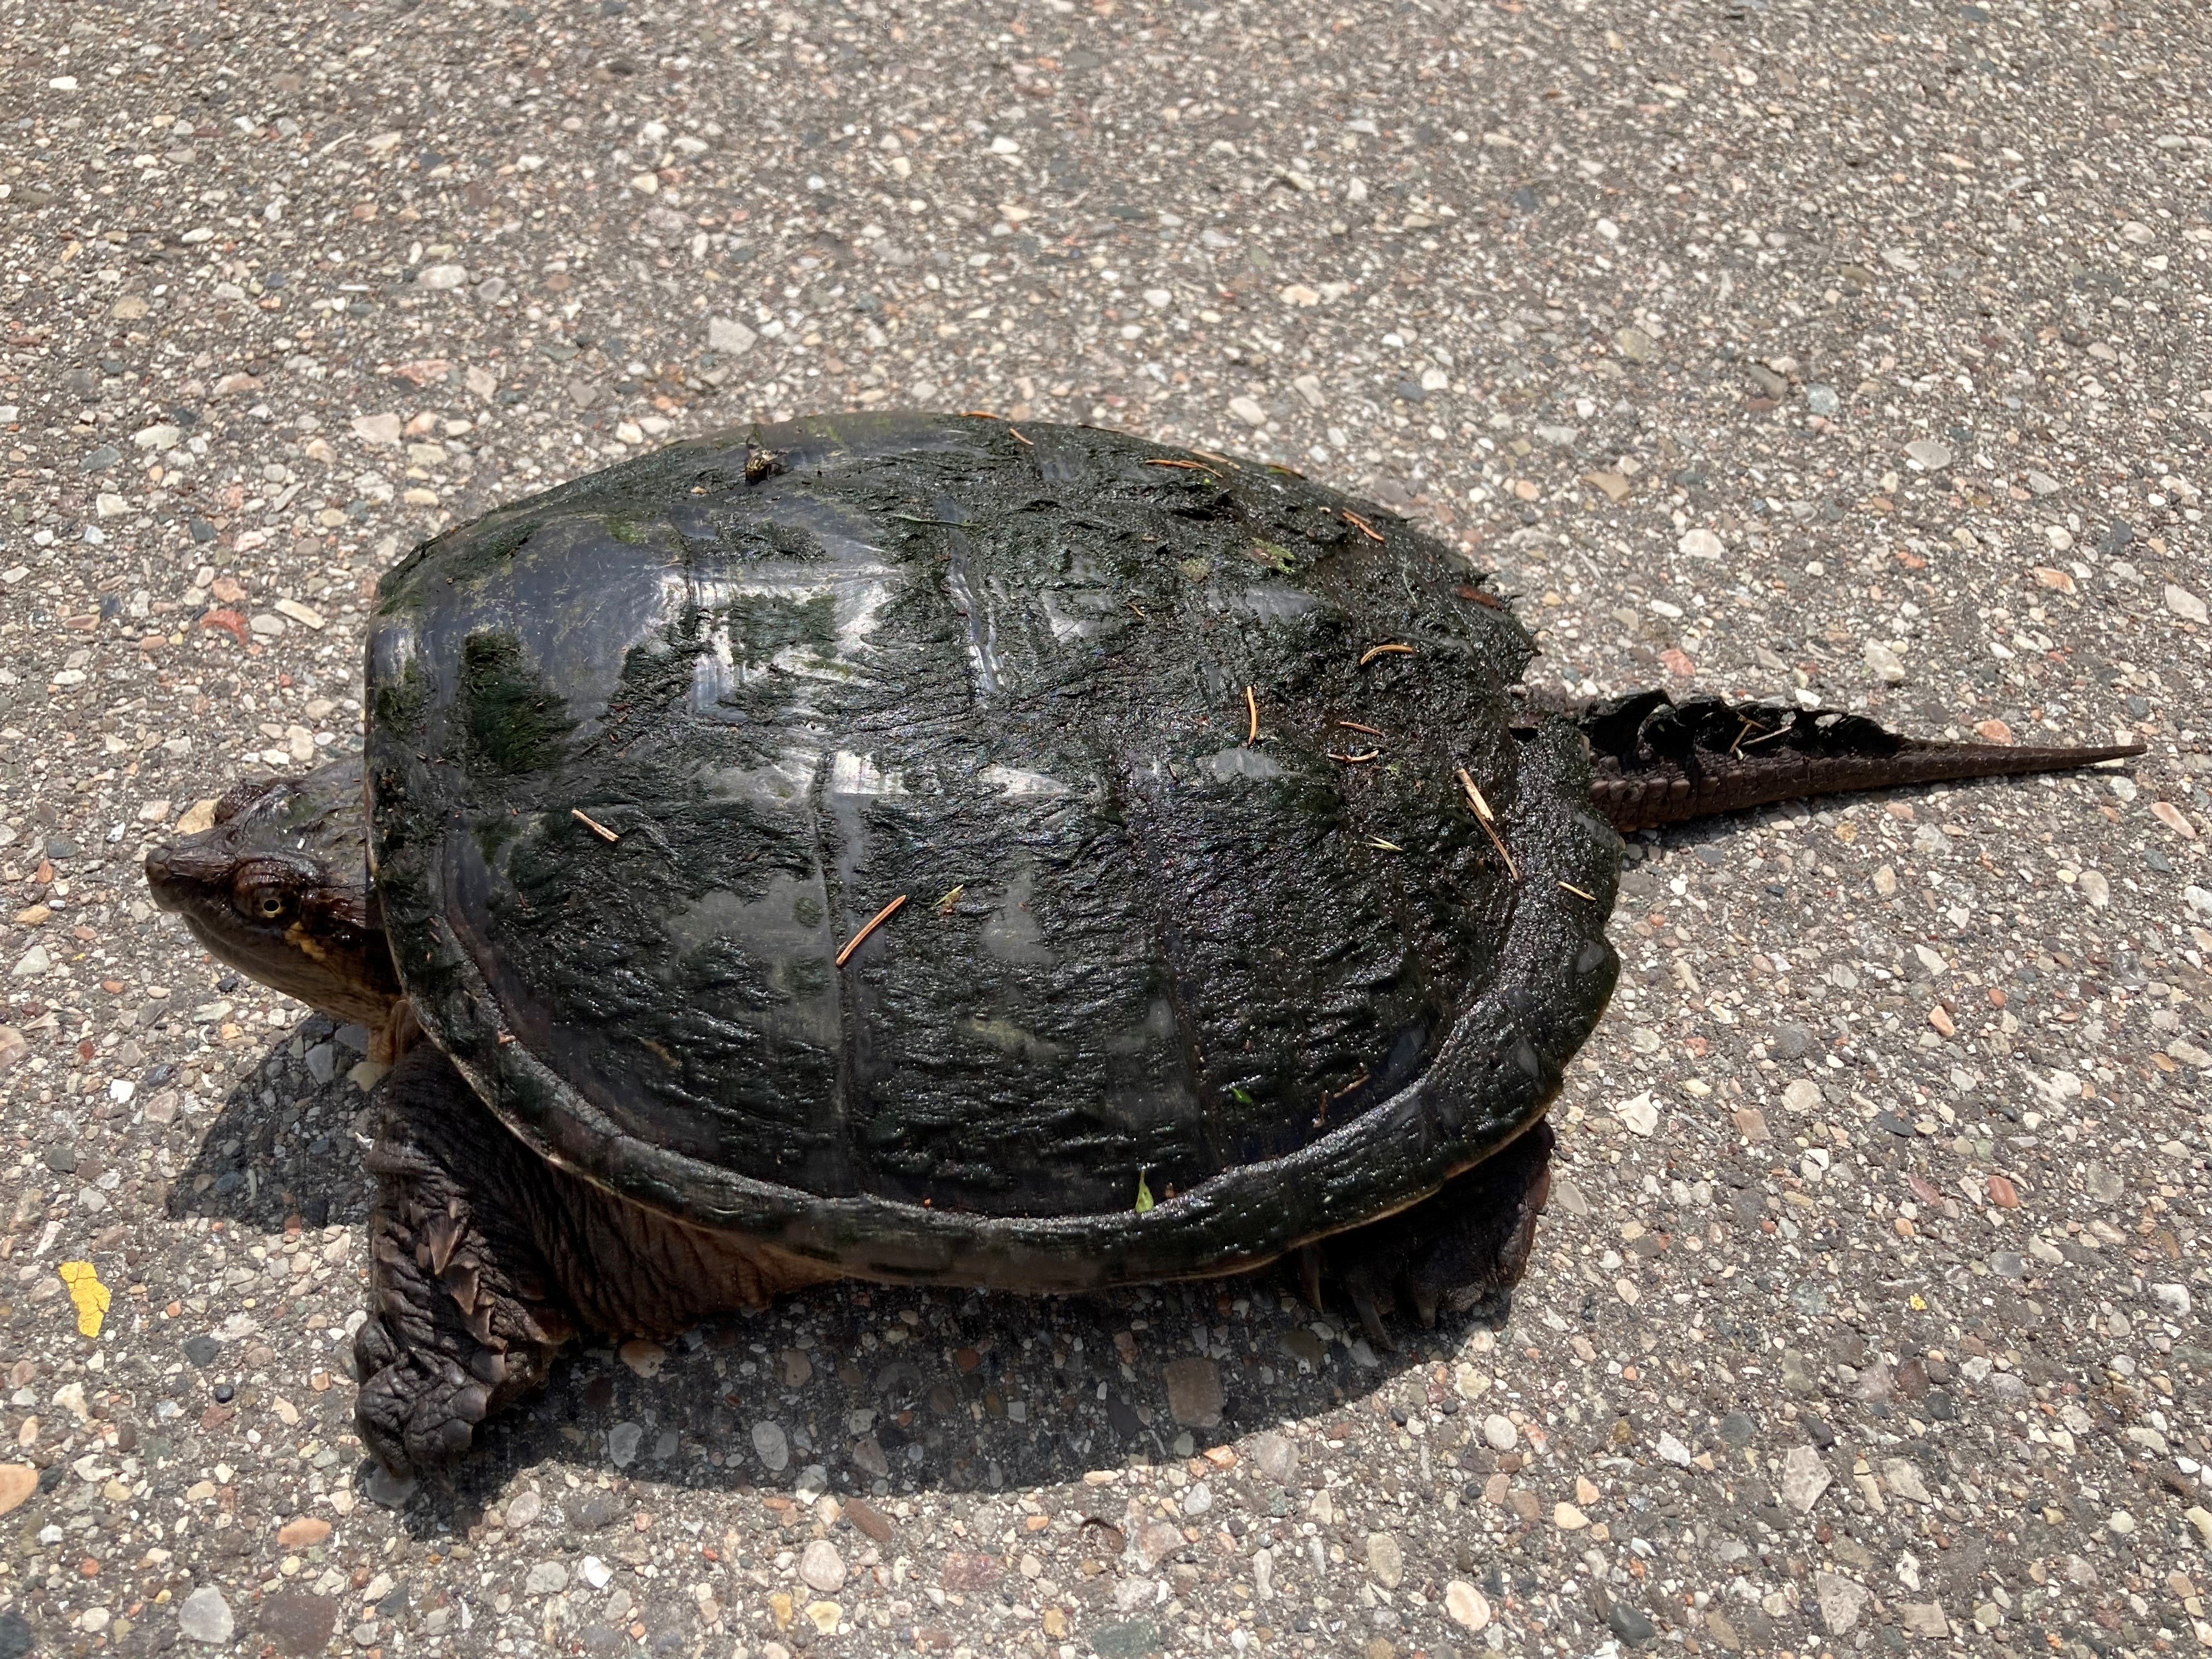 Snapping Turtle 2